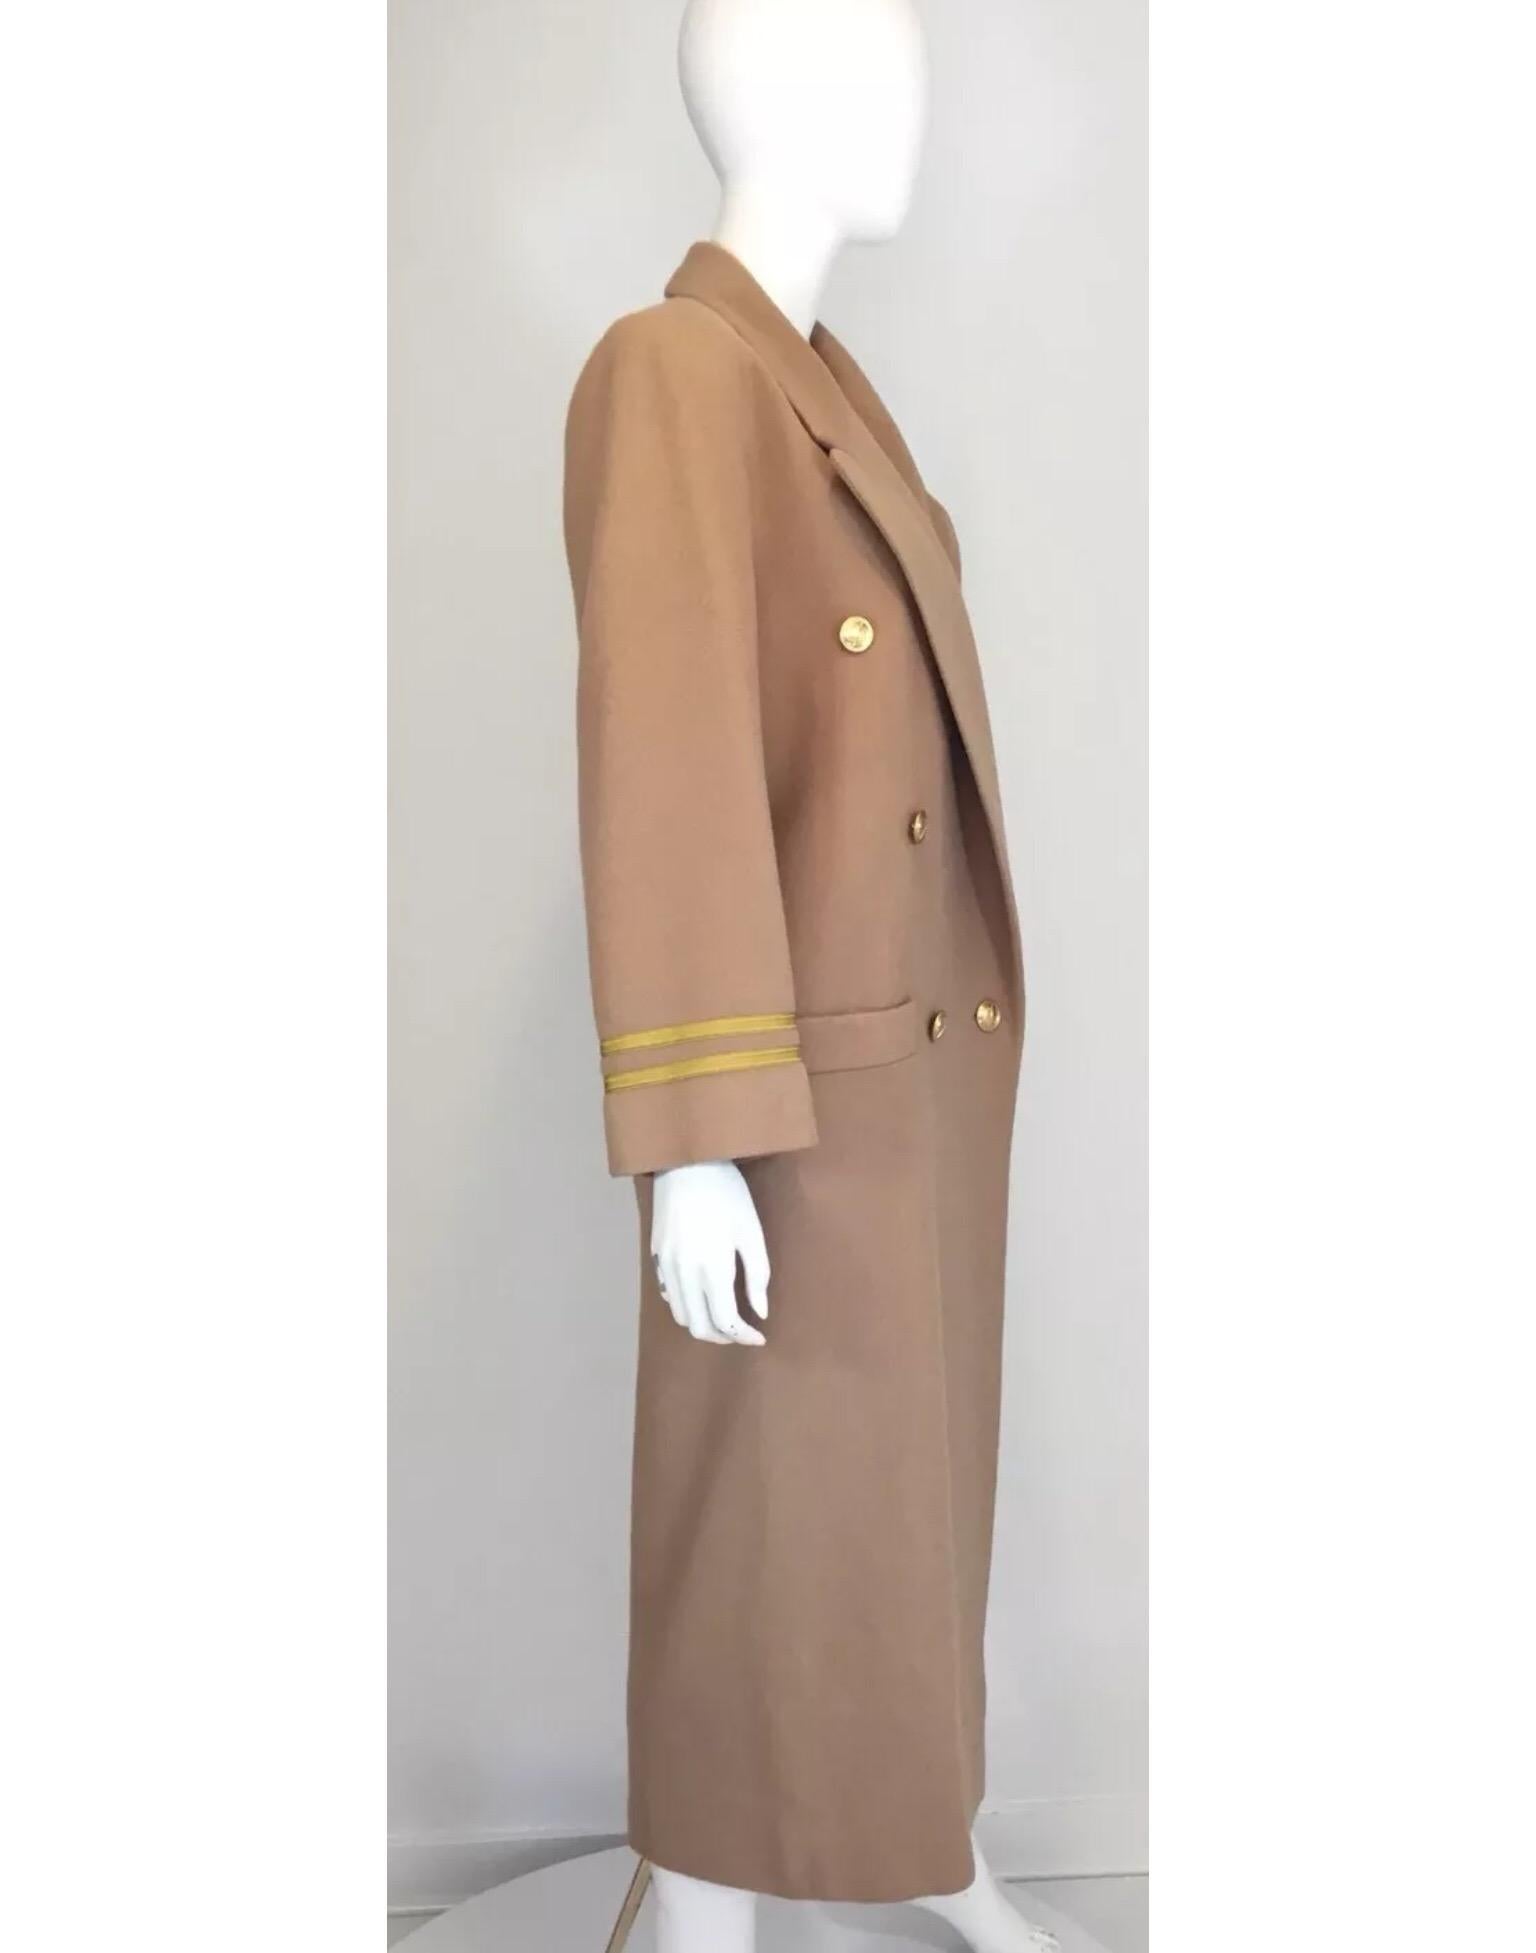 Christian Dior Coat

• Gold button closures at the front

• Slip pockets at the waist

• Fully lined

• Bust 44’’, sleeves 23”, shoulder to shoulder 17”, waist 42”, length 50”
